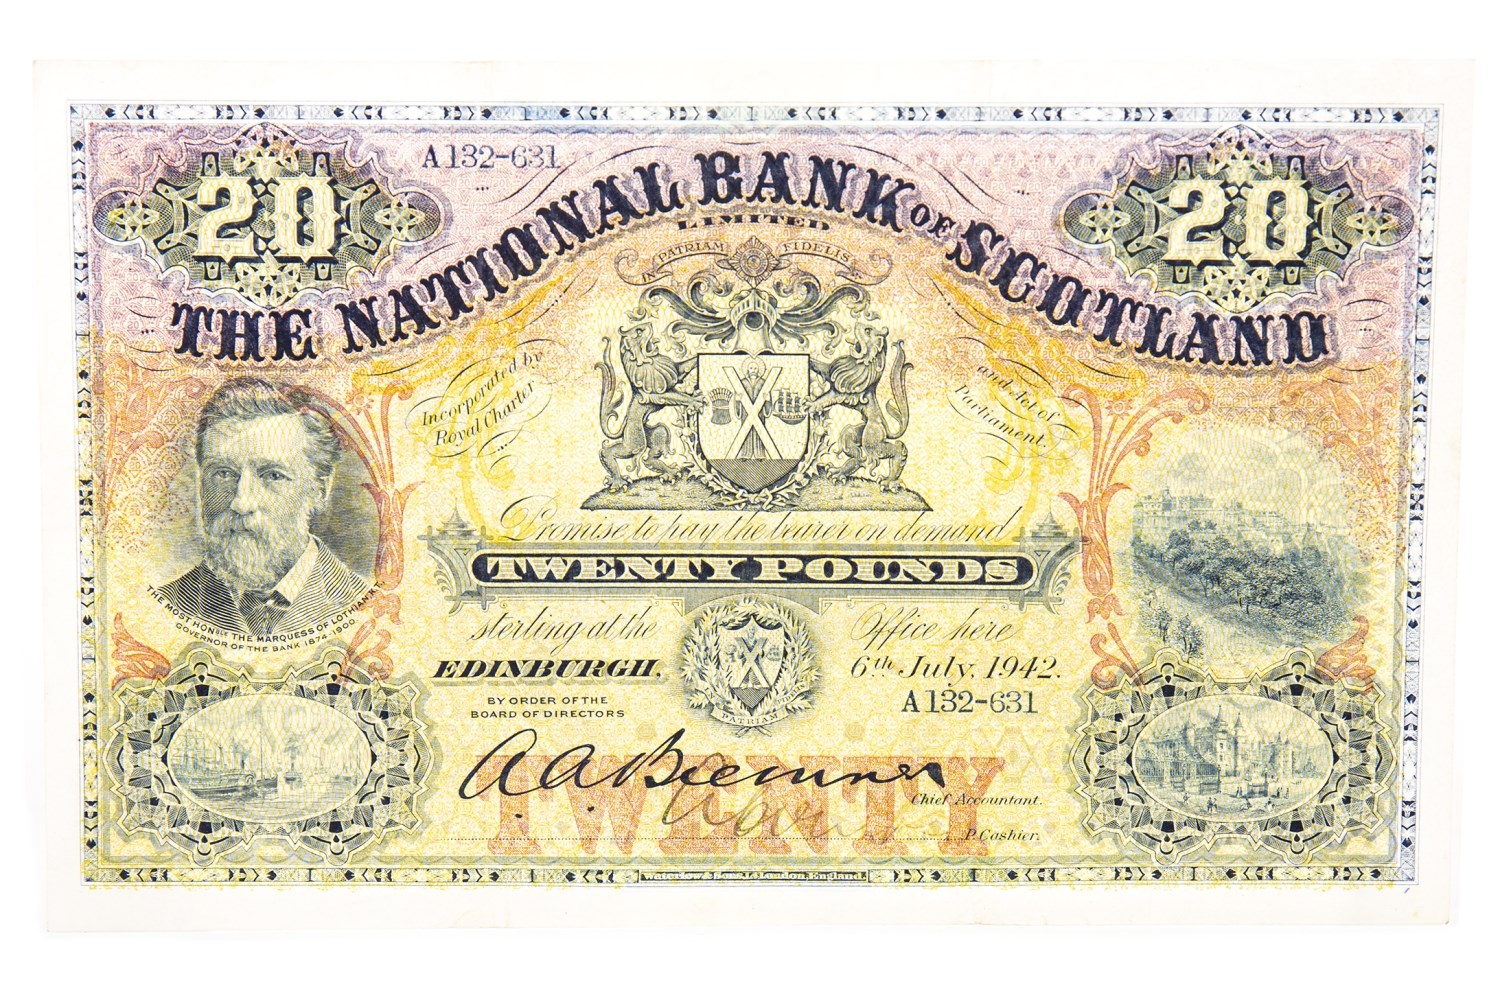 THE NATIONAL BANK OF SCOTLAND £20 NOTE, 1942